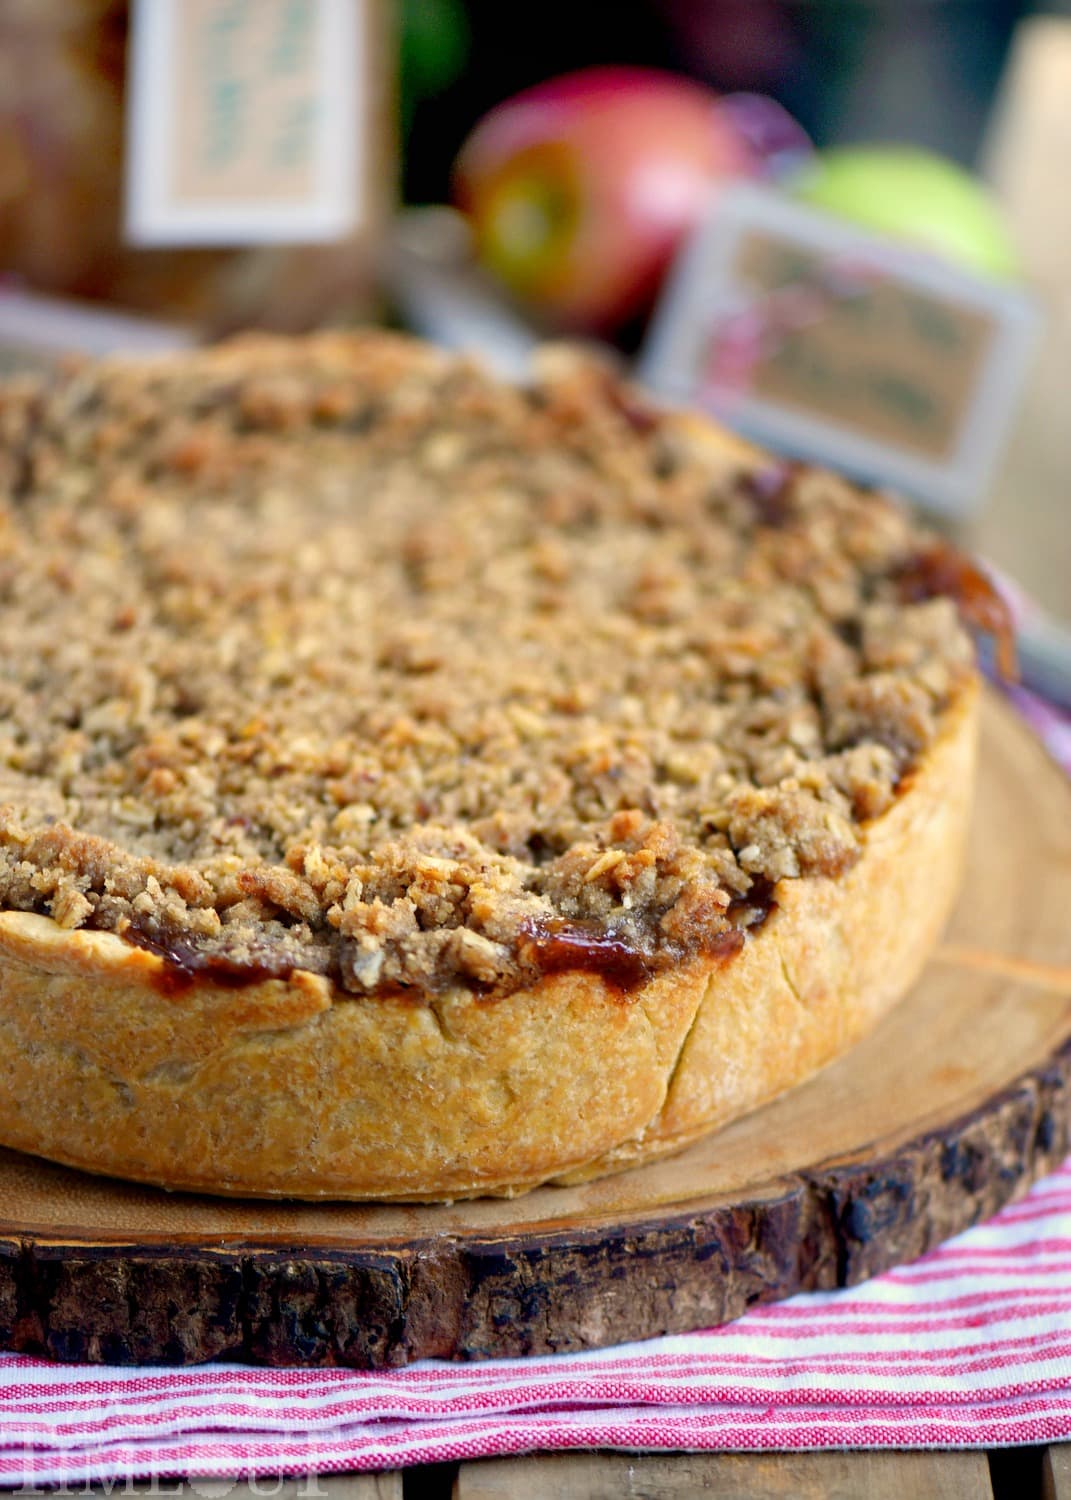 Deep Dish Dutch Apple Pie is loaded with a spiced apple filling and topped with a crunch, sweet, pecan streusel topping. Best served with a big scoop of vanilla ice cream and caramel sauce. This is THE dessert for the fall season! | Mom On Timeout